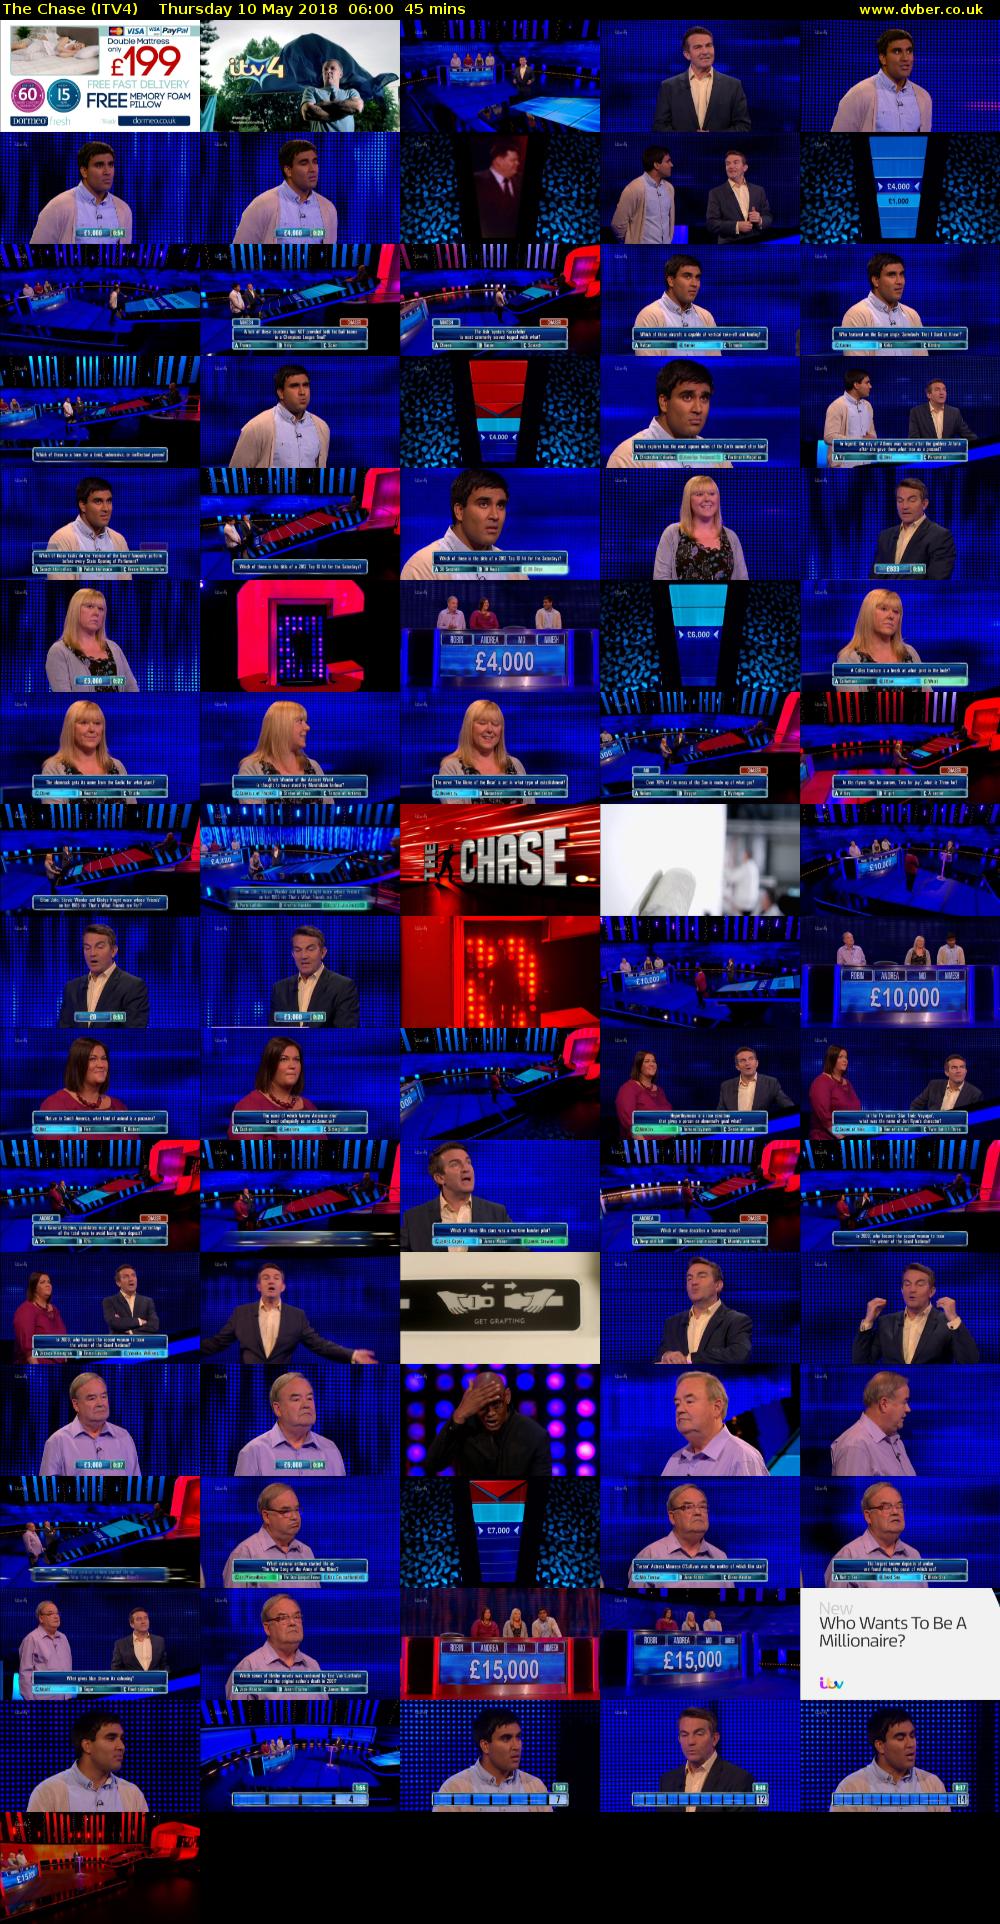 The Chase (ITV4) Thursday 10 May 2018 06:00 - 06:45